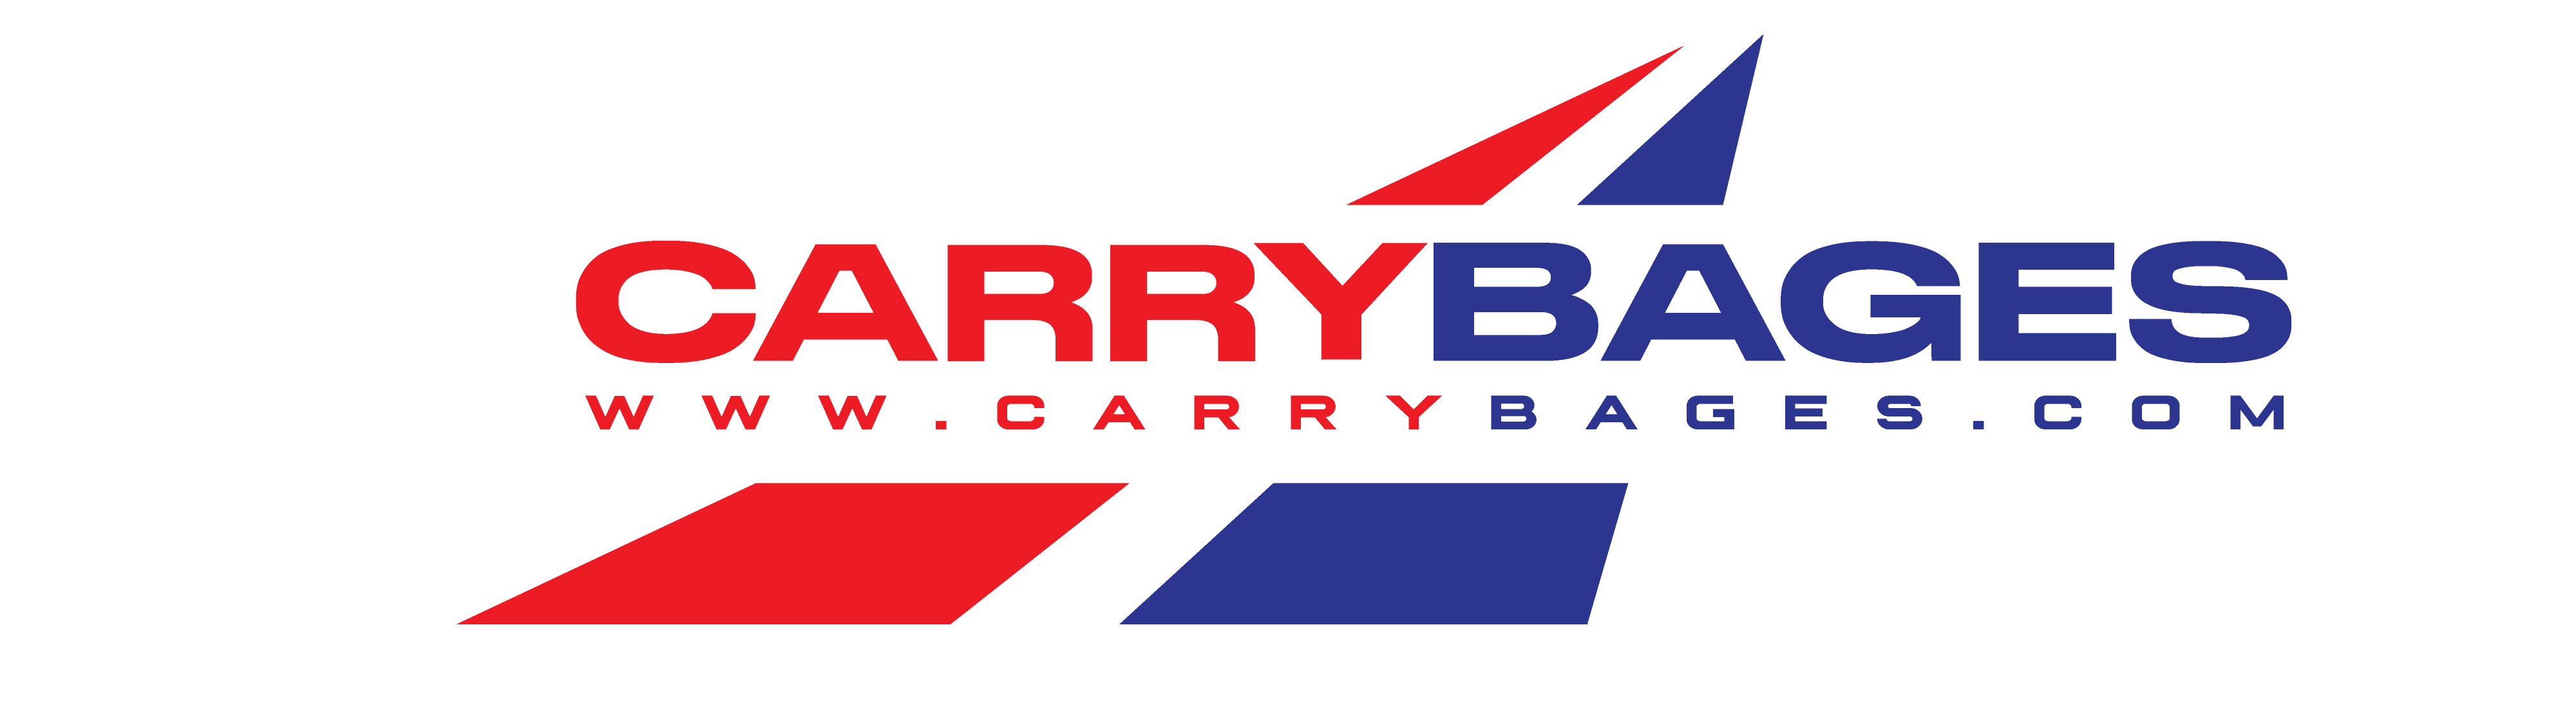 carrybages.com